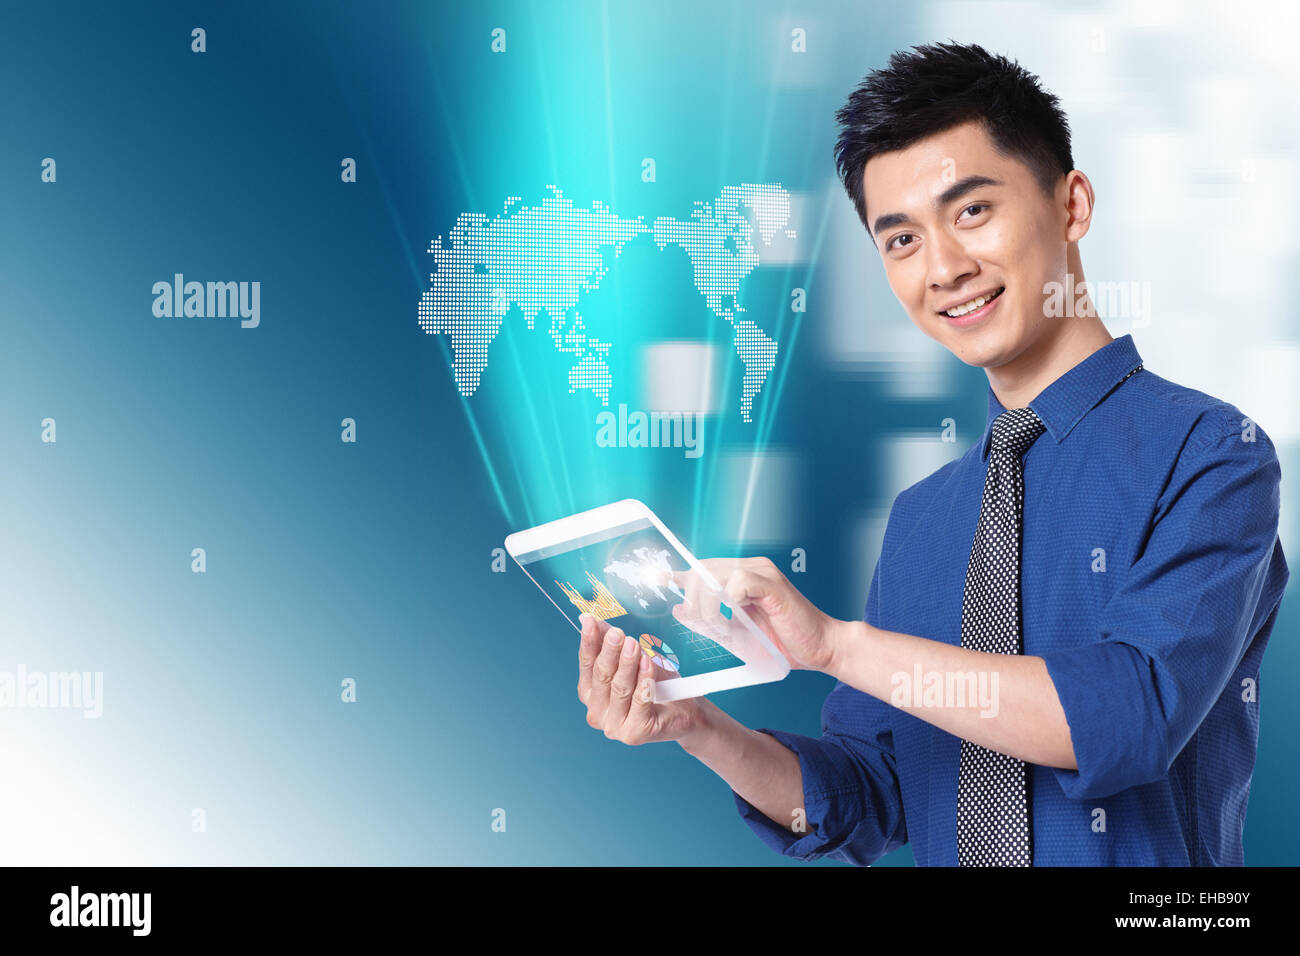 Business man holding a tablet model Stock Photo